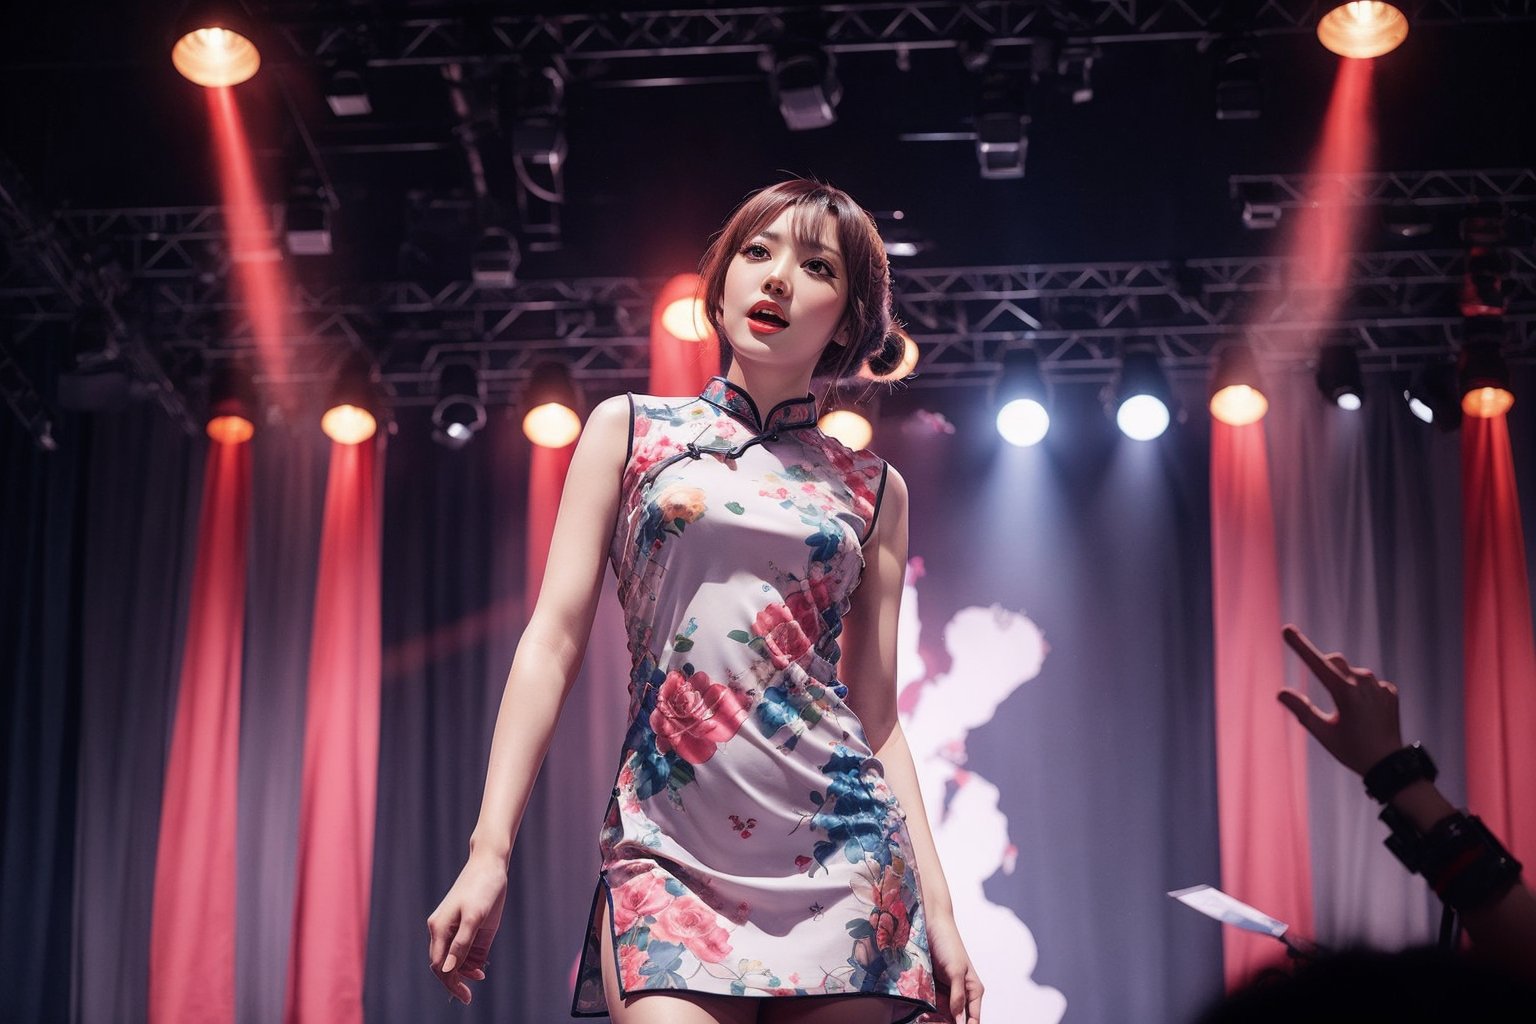 A gorgeously dressed woman wearing a cheongsam and a retro hairstyle stood on the stage and sang, recreating the nightclub scene in the 1930s.